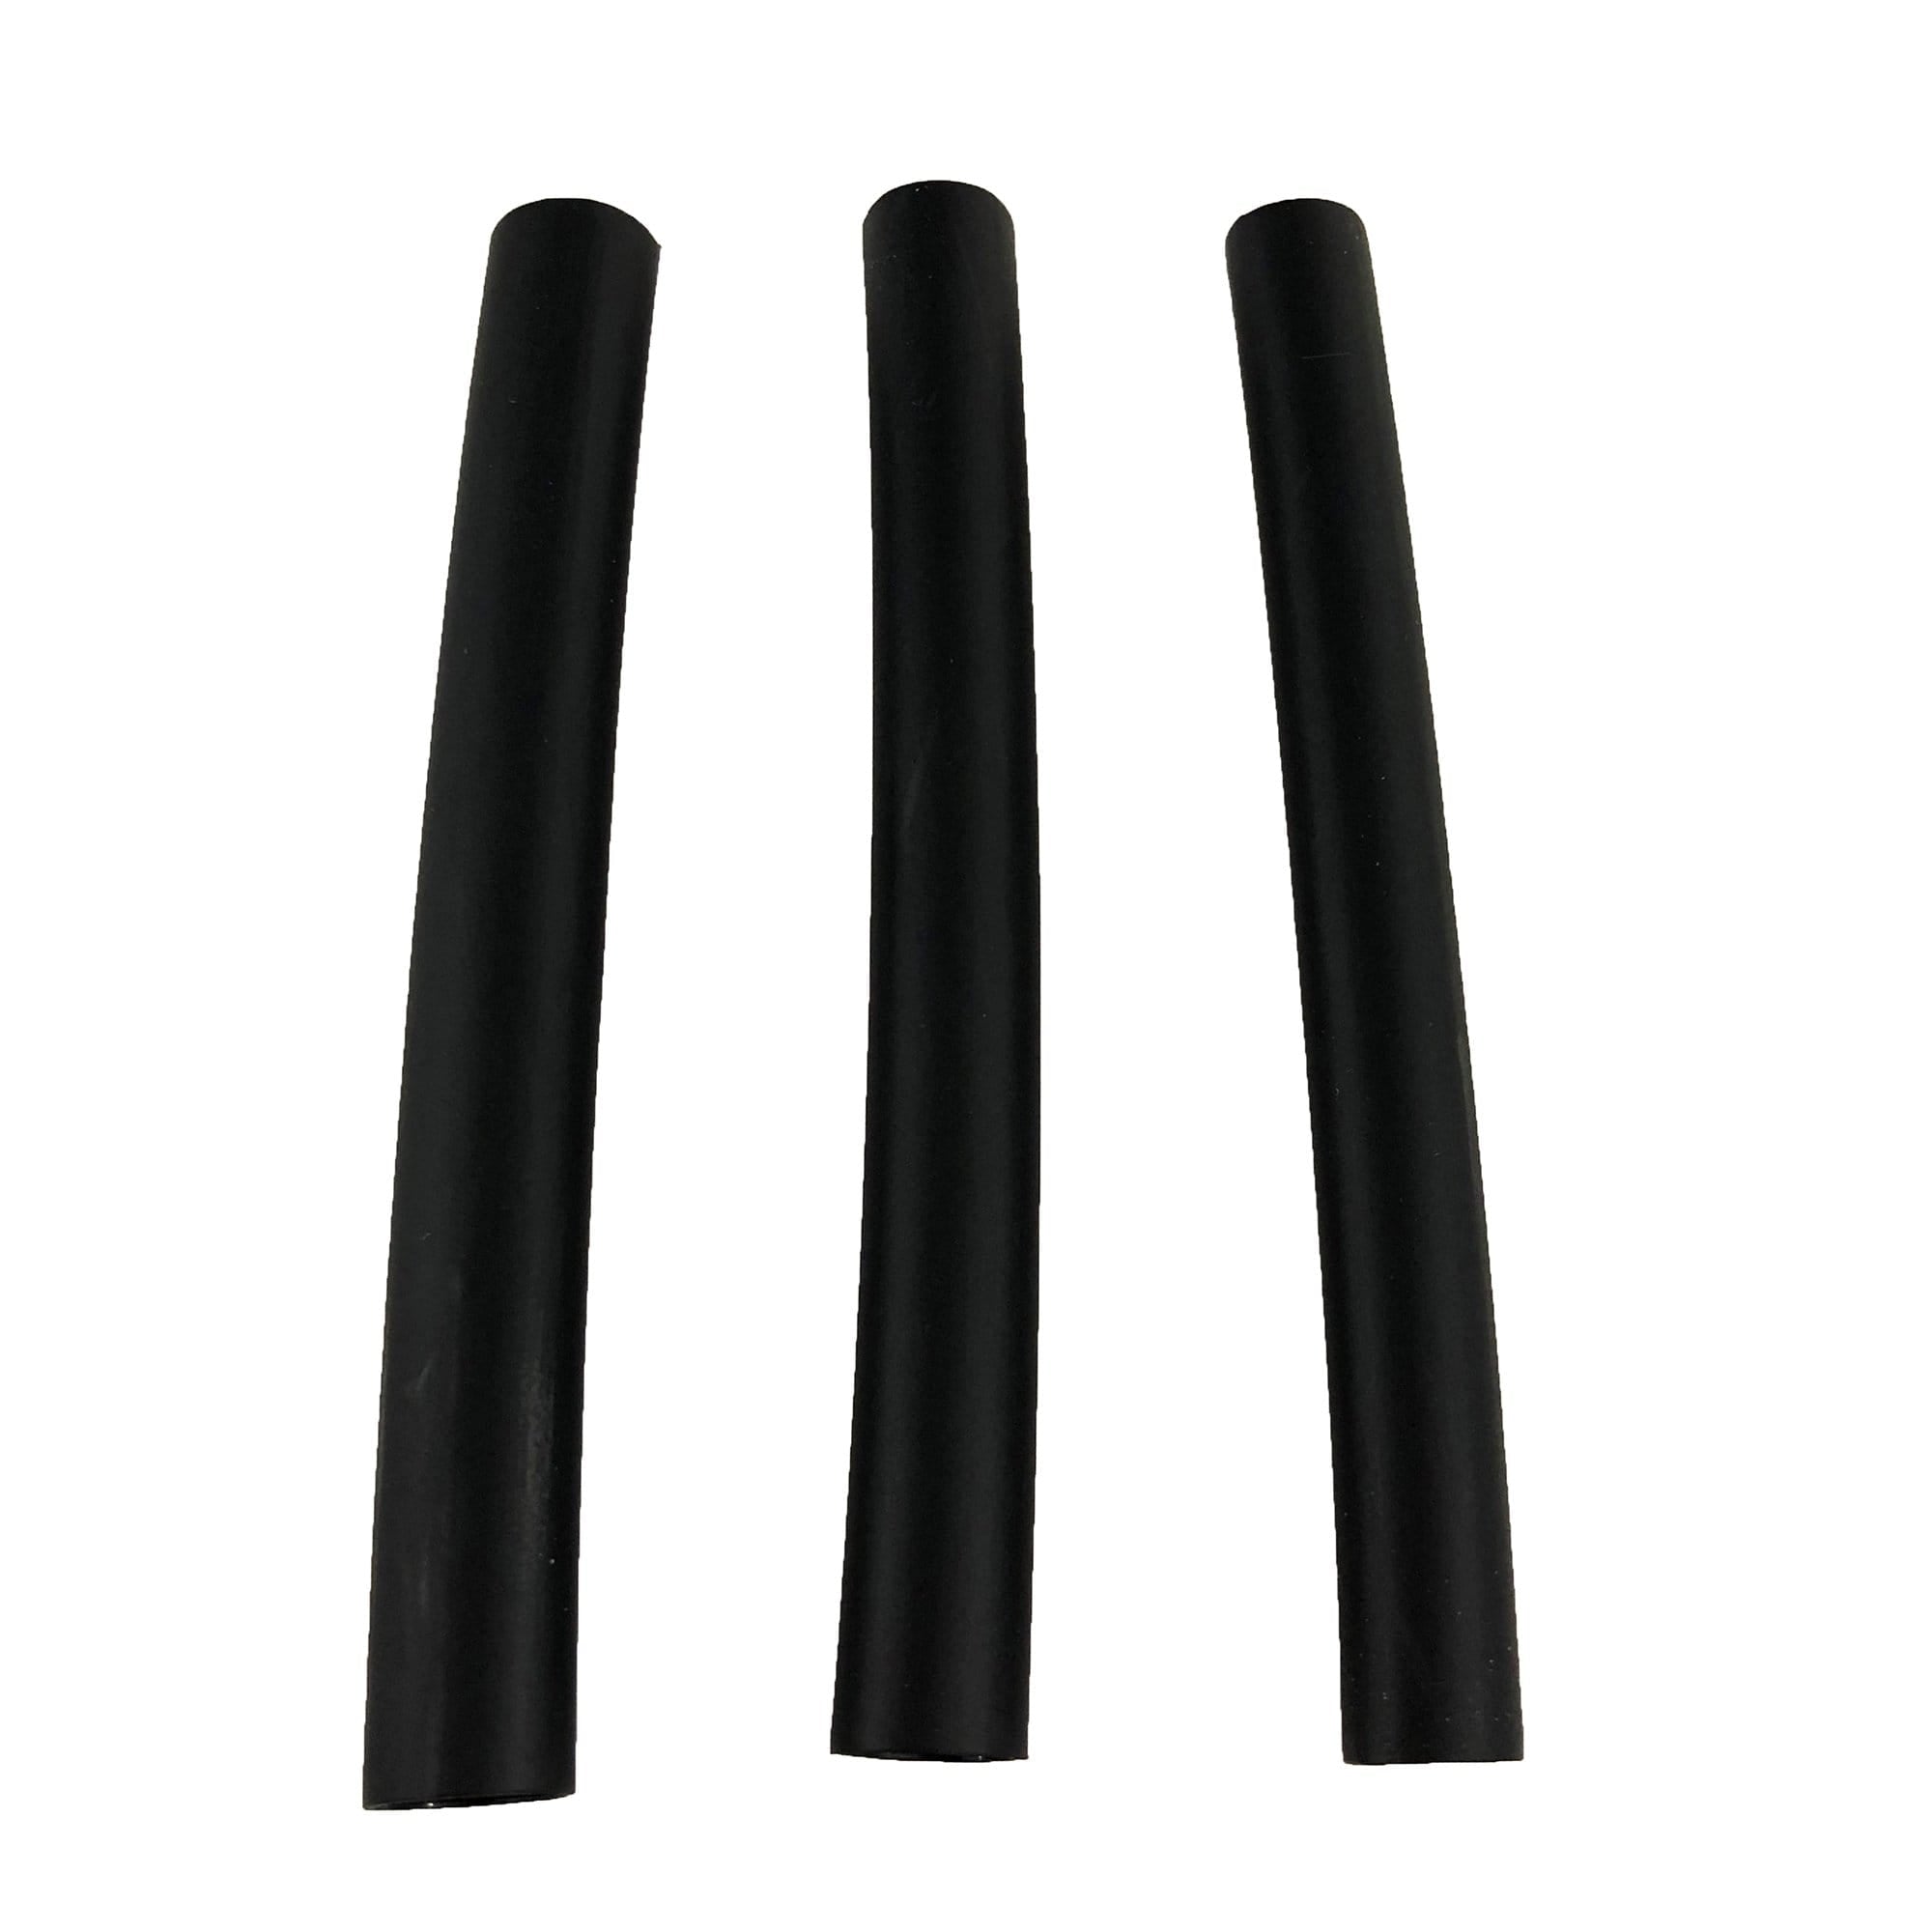 Power Products Ancor 303103 Heat Shrink Tubing, 1/4" x 3", Black, 3pc